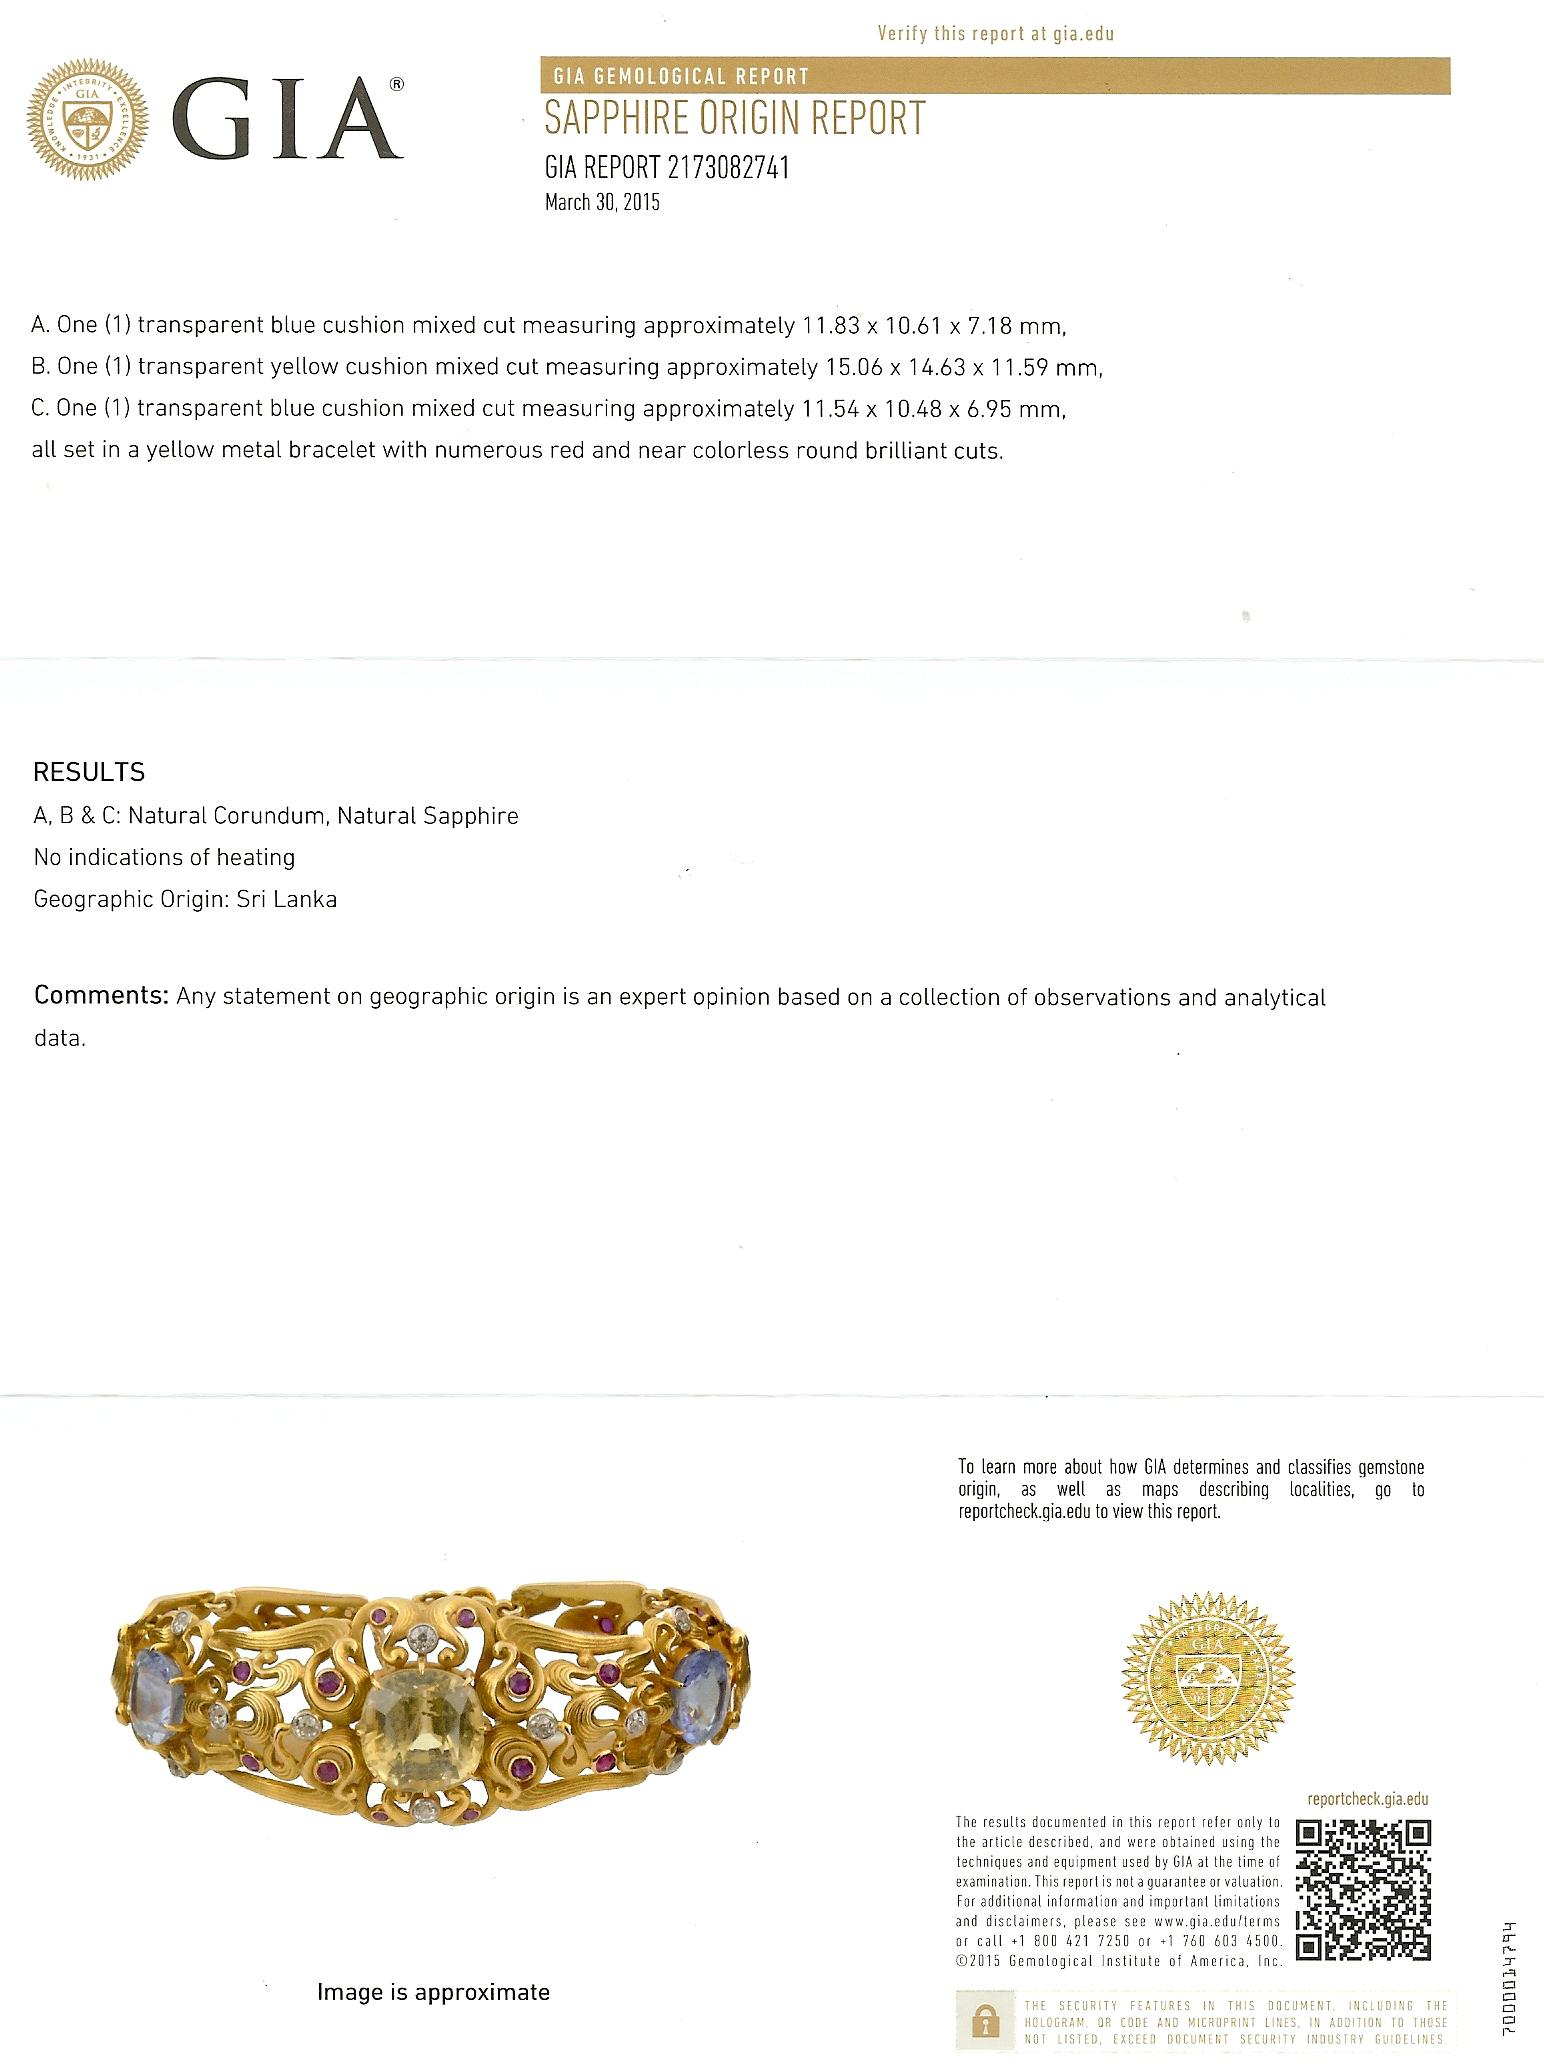 This 14 Karat Gold Georgian Style Sapphire Bracelet features three focal GIA Certified Sri Lanka mined Cushion cut Sapphires – 1 Central 15 carat Canary Yellow Sapphire & 2 Surrounding Traditional Ceylon Sapphires totaling 14 carats. Accented with a